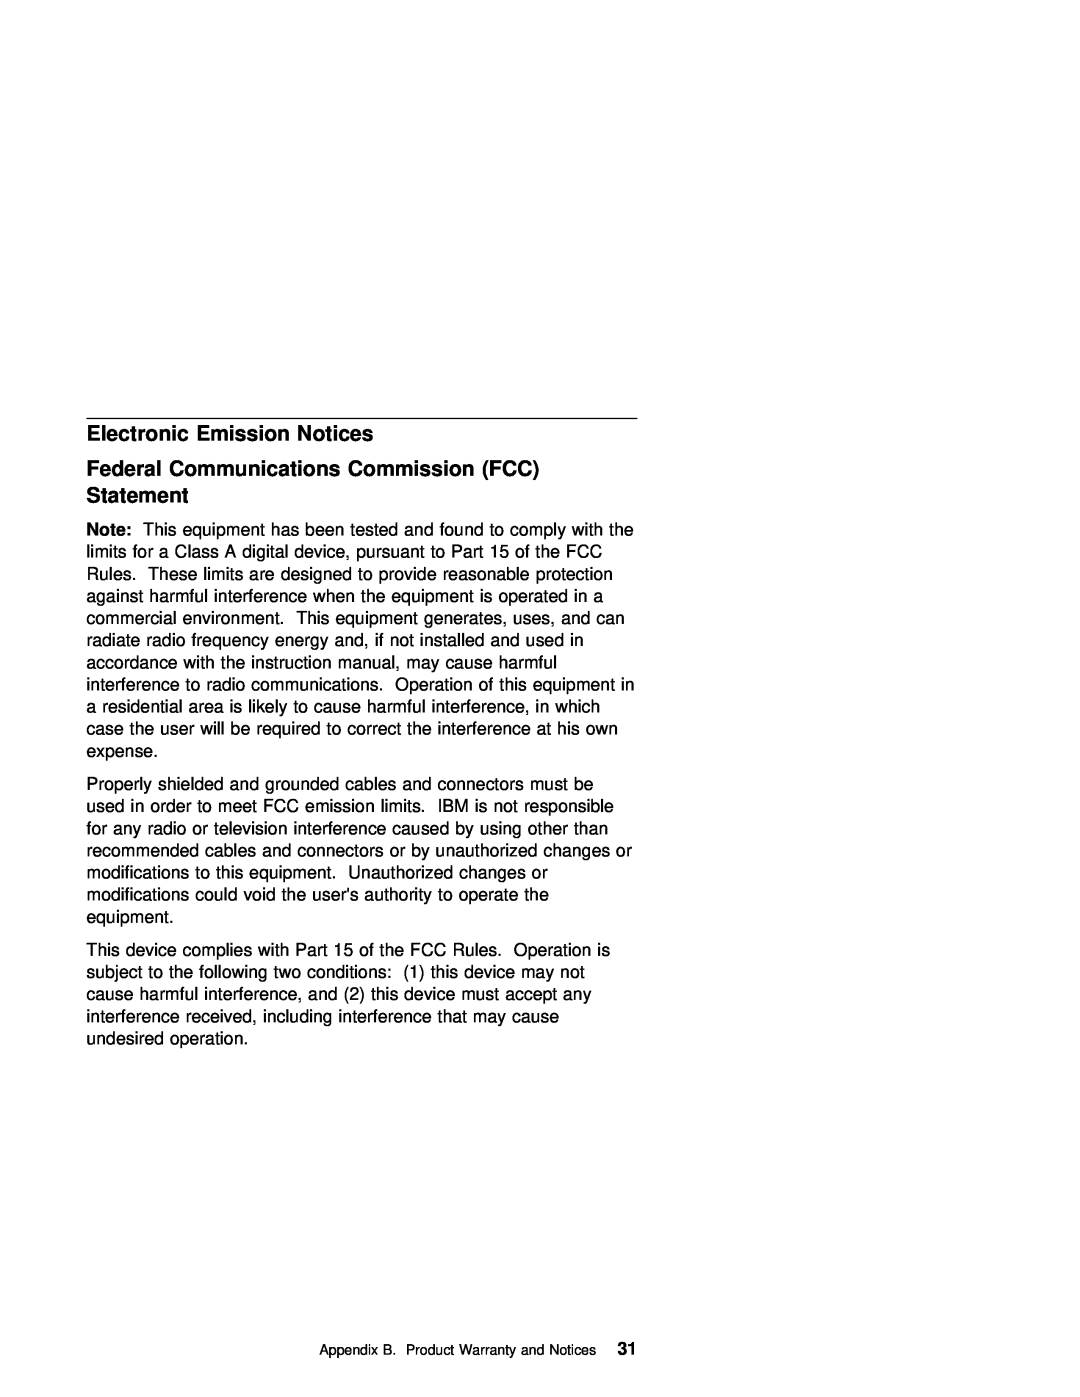 IBM 3270 manual Electronic Emission Notices Federal Communications Commission FCC, Statement 